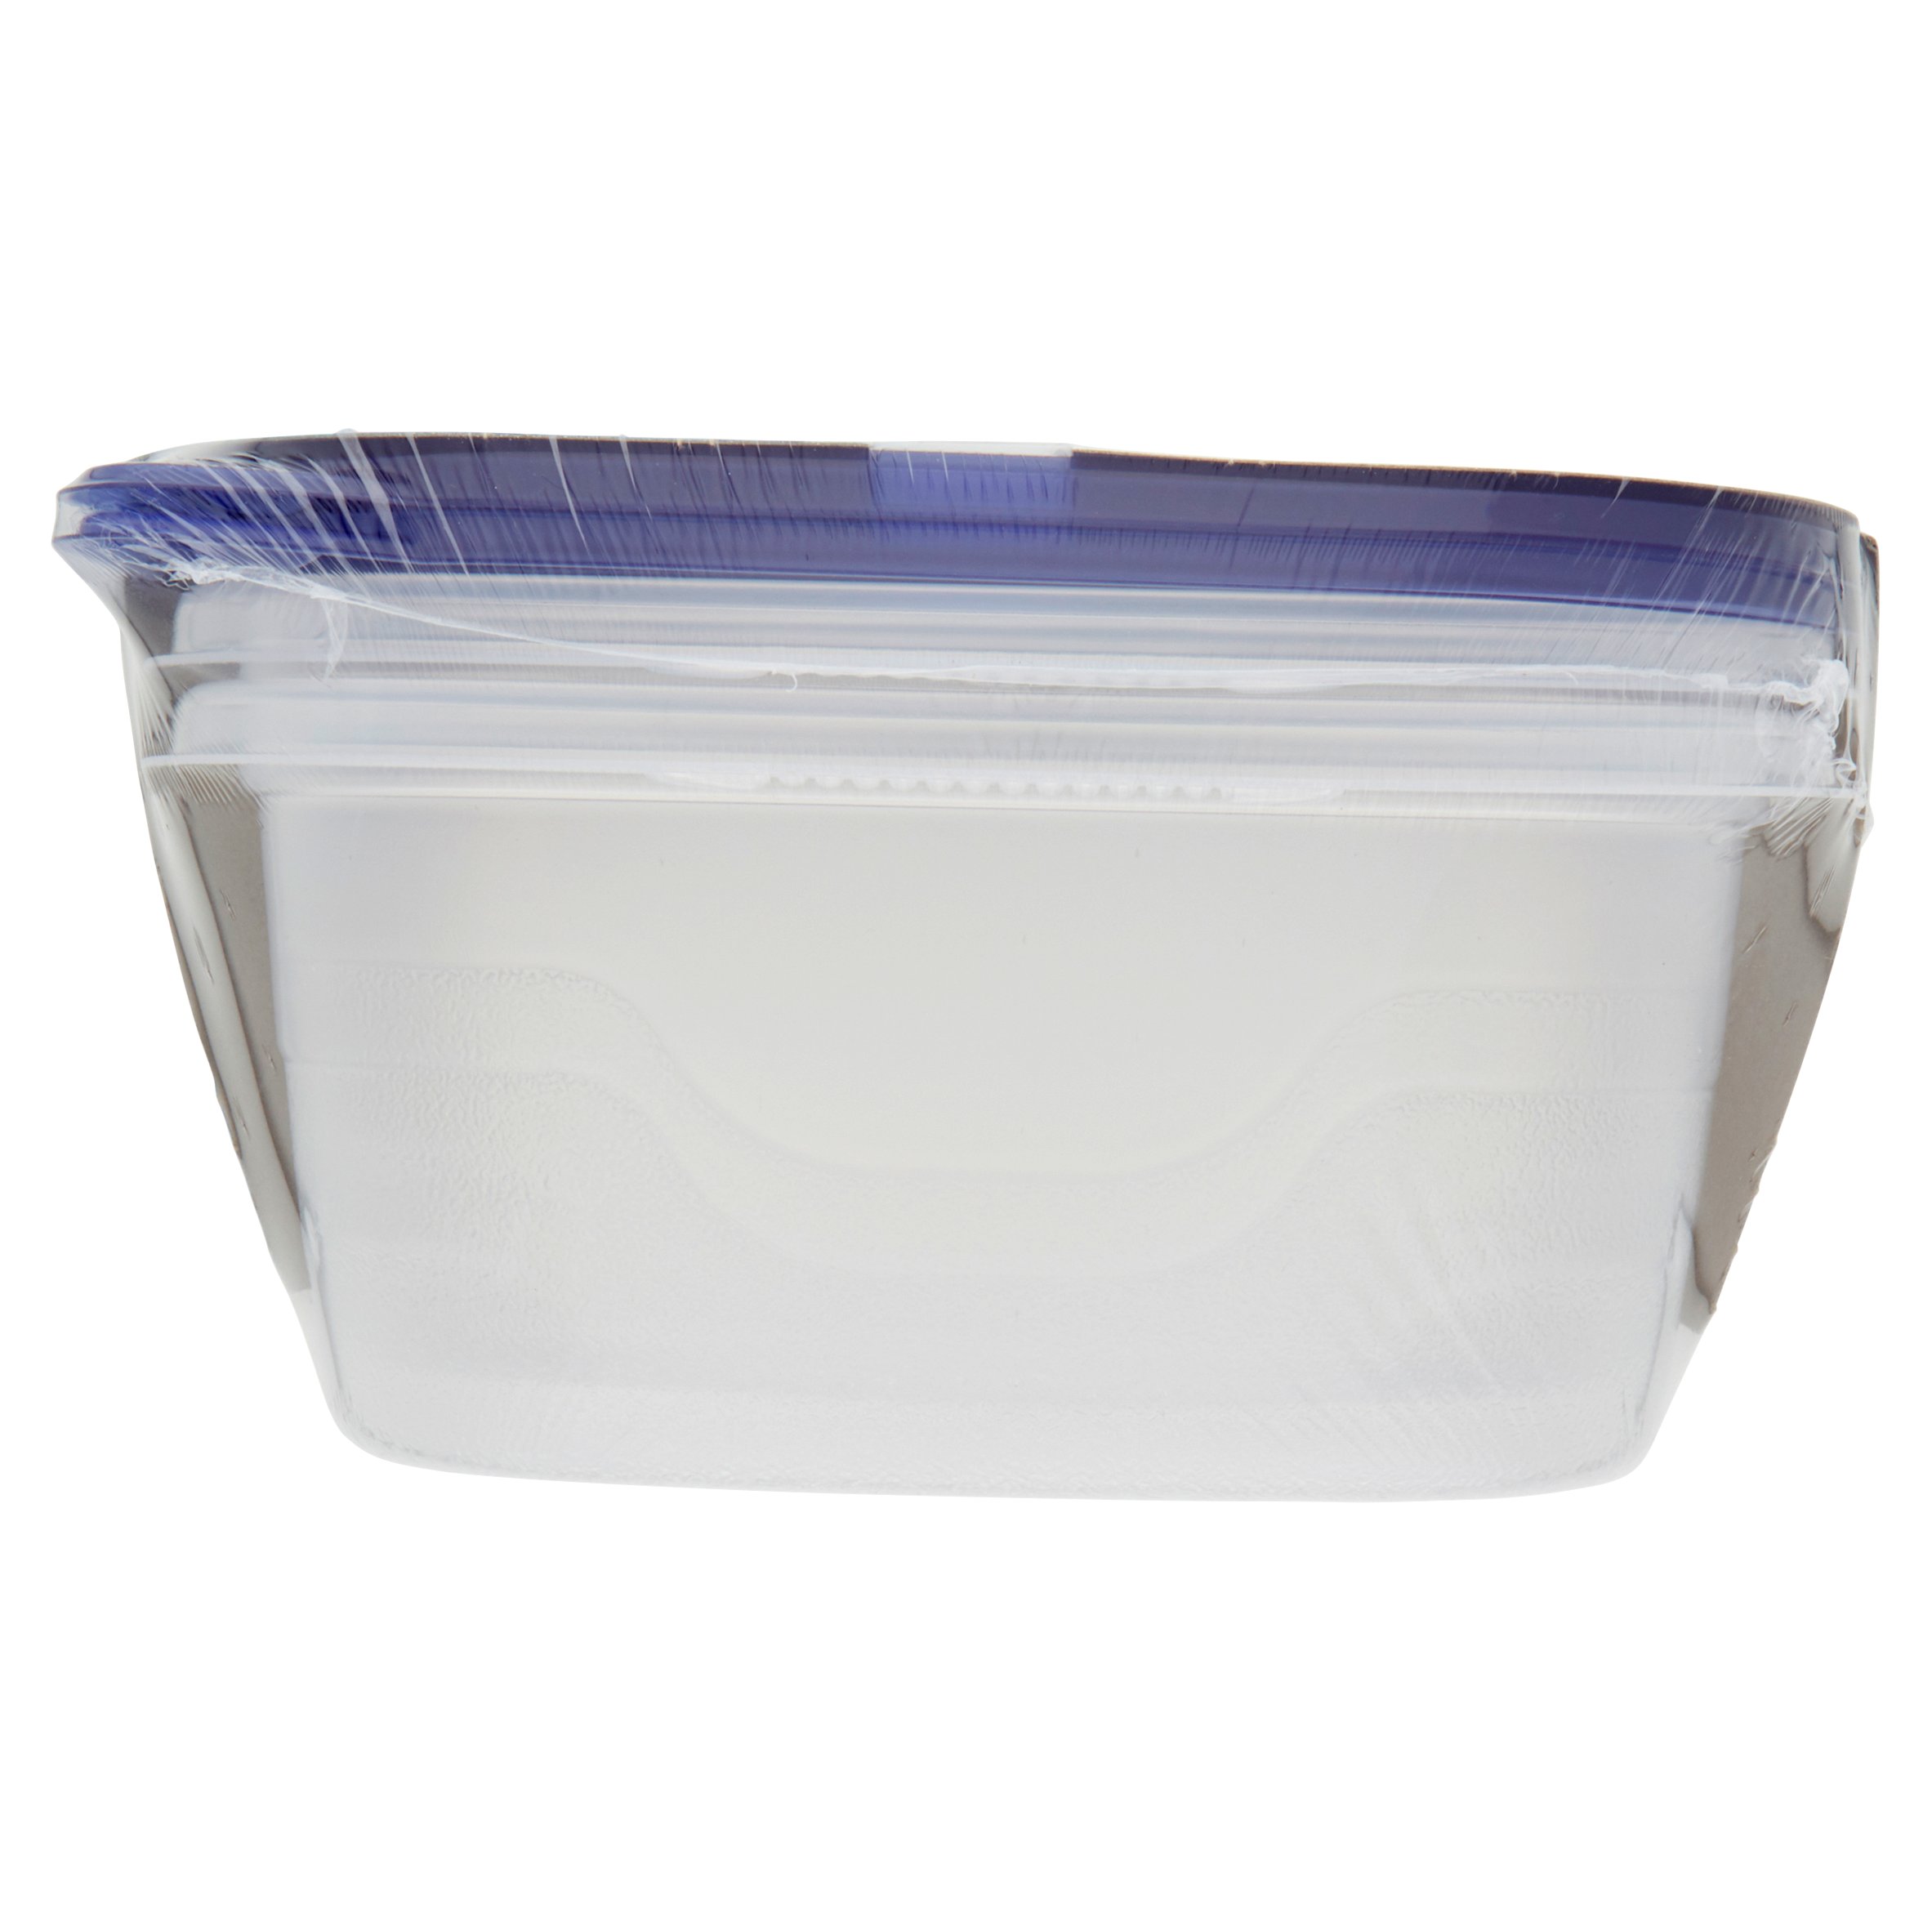 Great Value Take Outs Storage Container, BPA Free, Large Rectangle, 2 Count - image 5 of 5